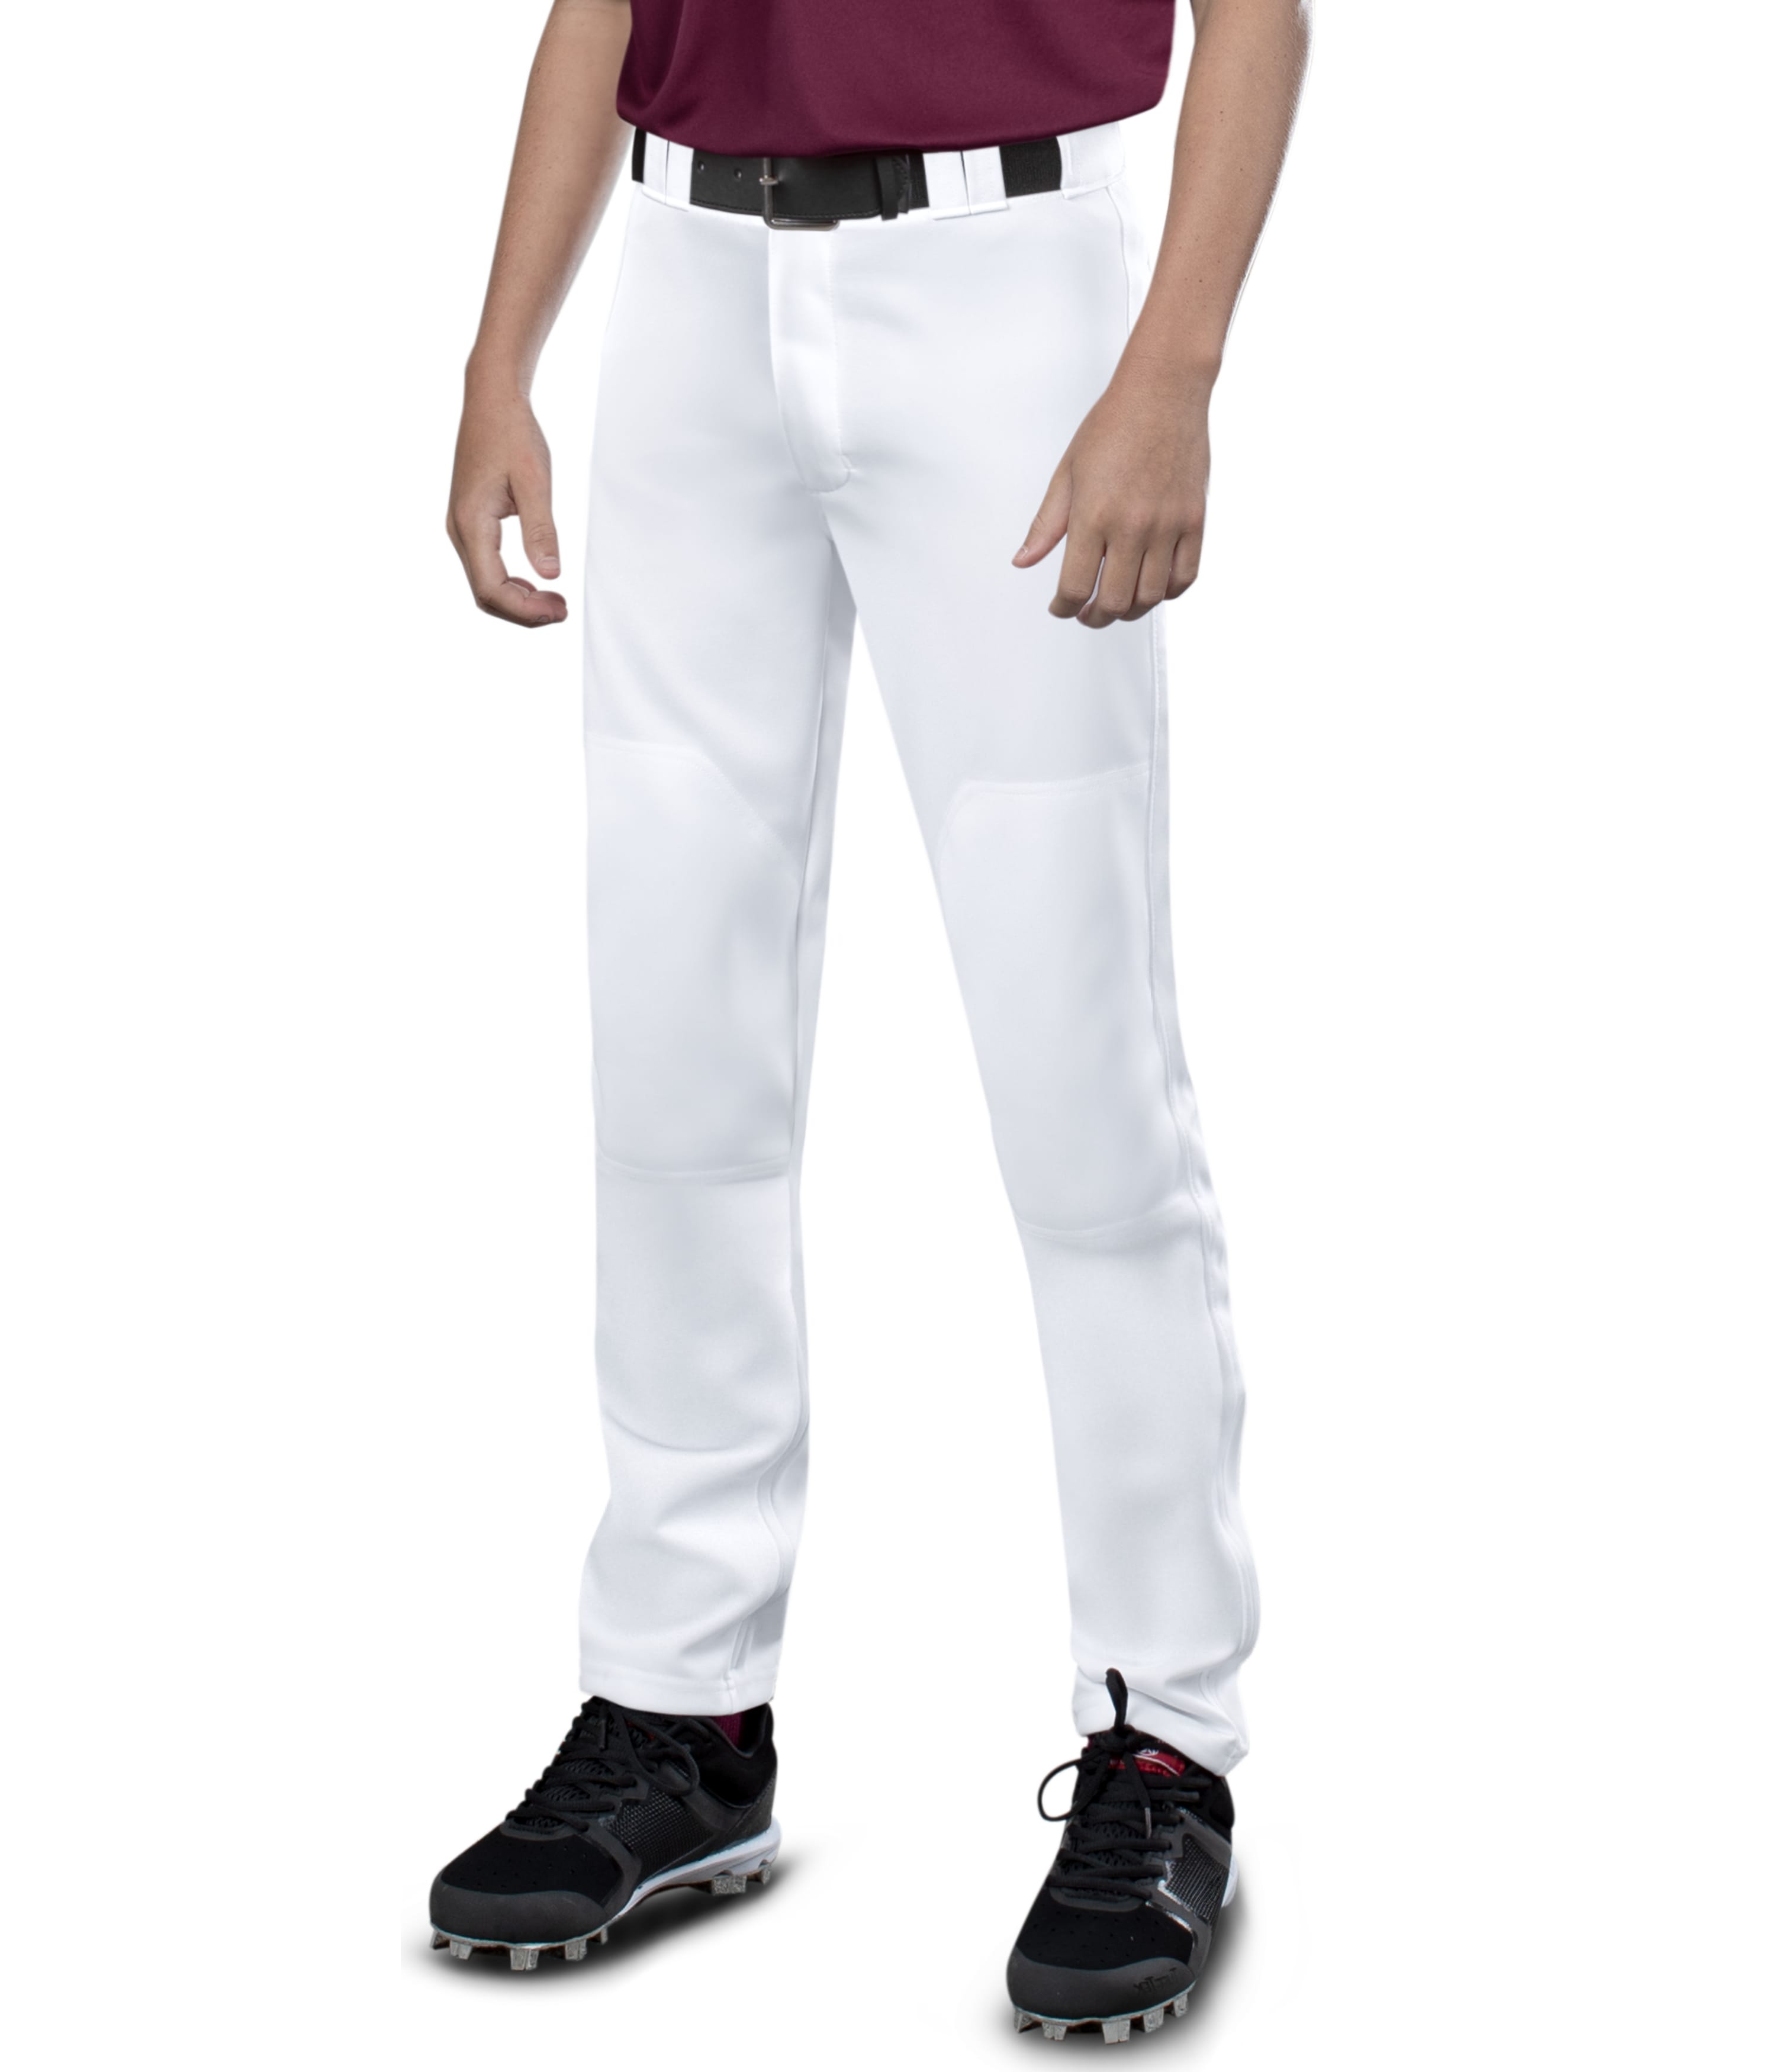 ApparelBus - Russell Athletic R10LGB Youth Solid Diamond Series